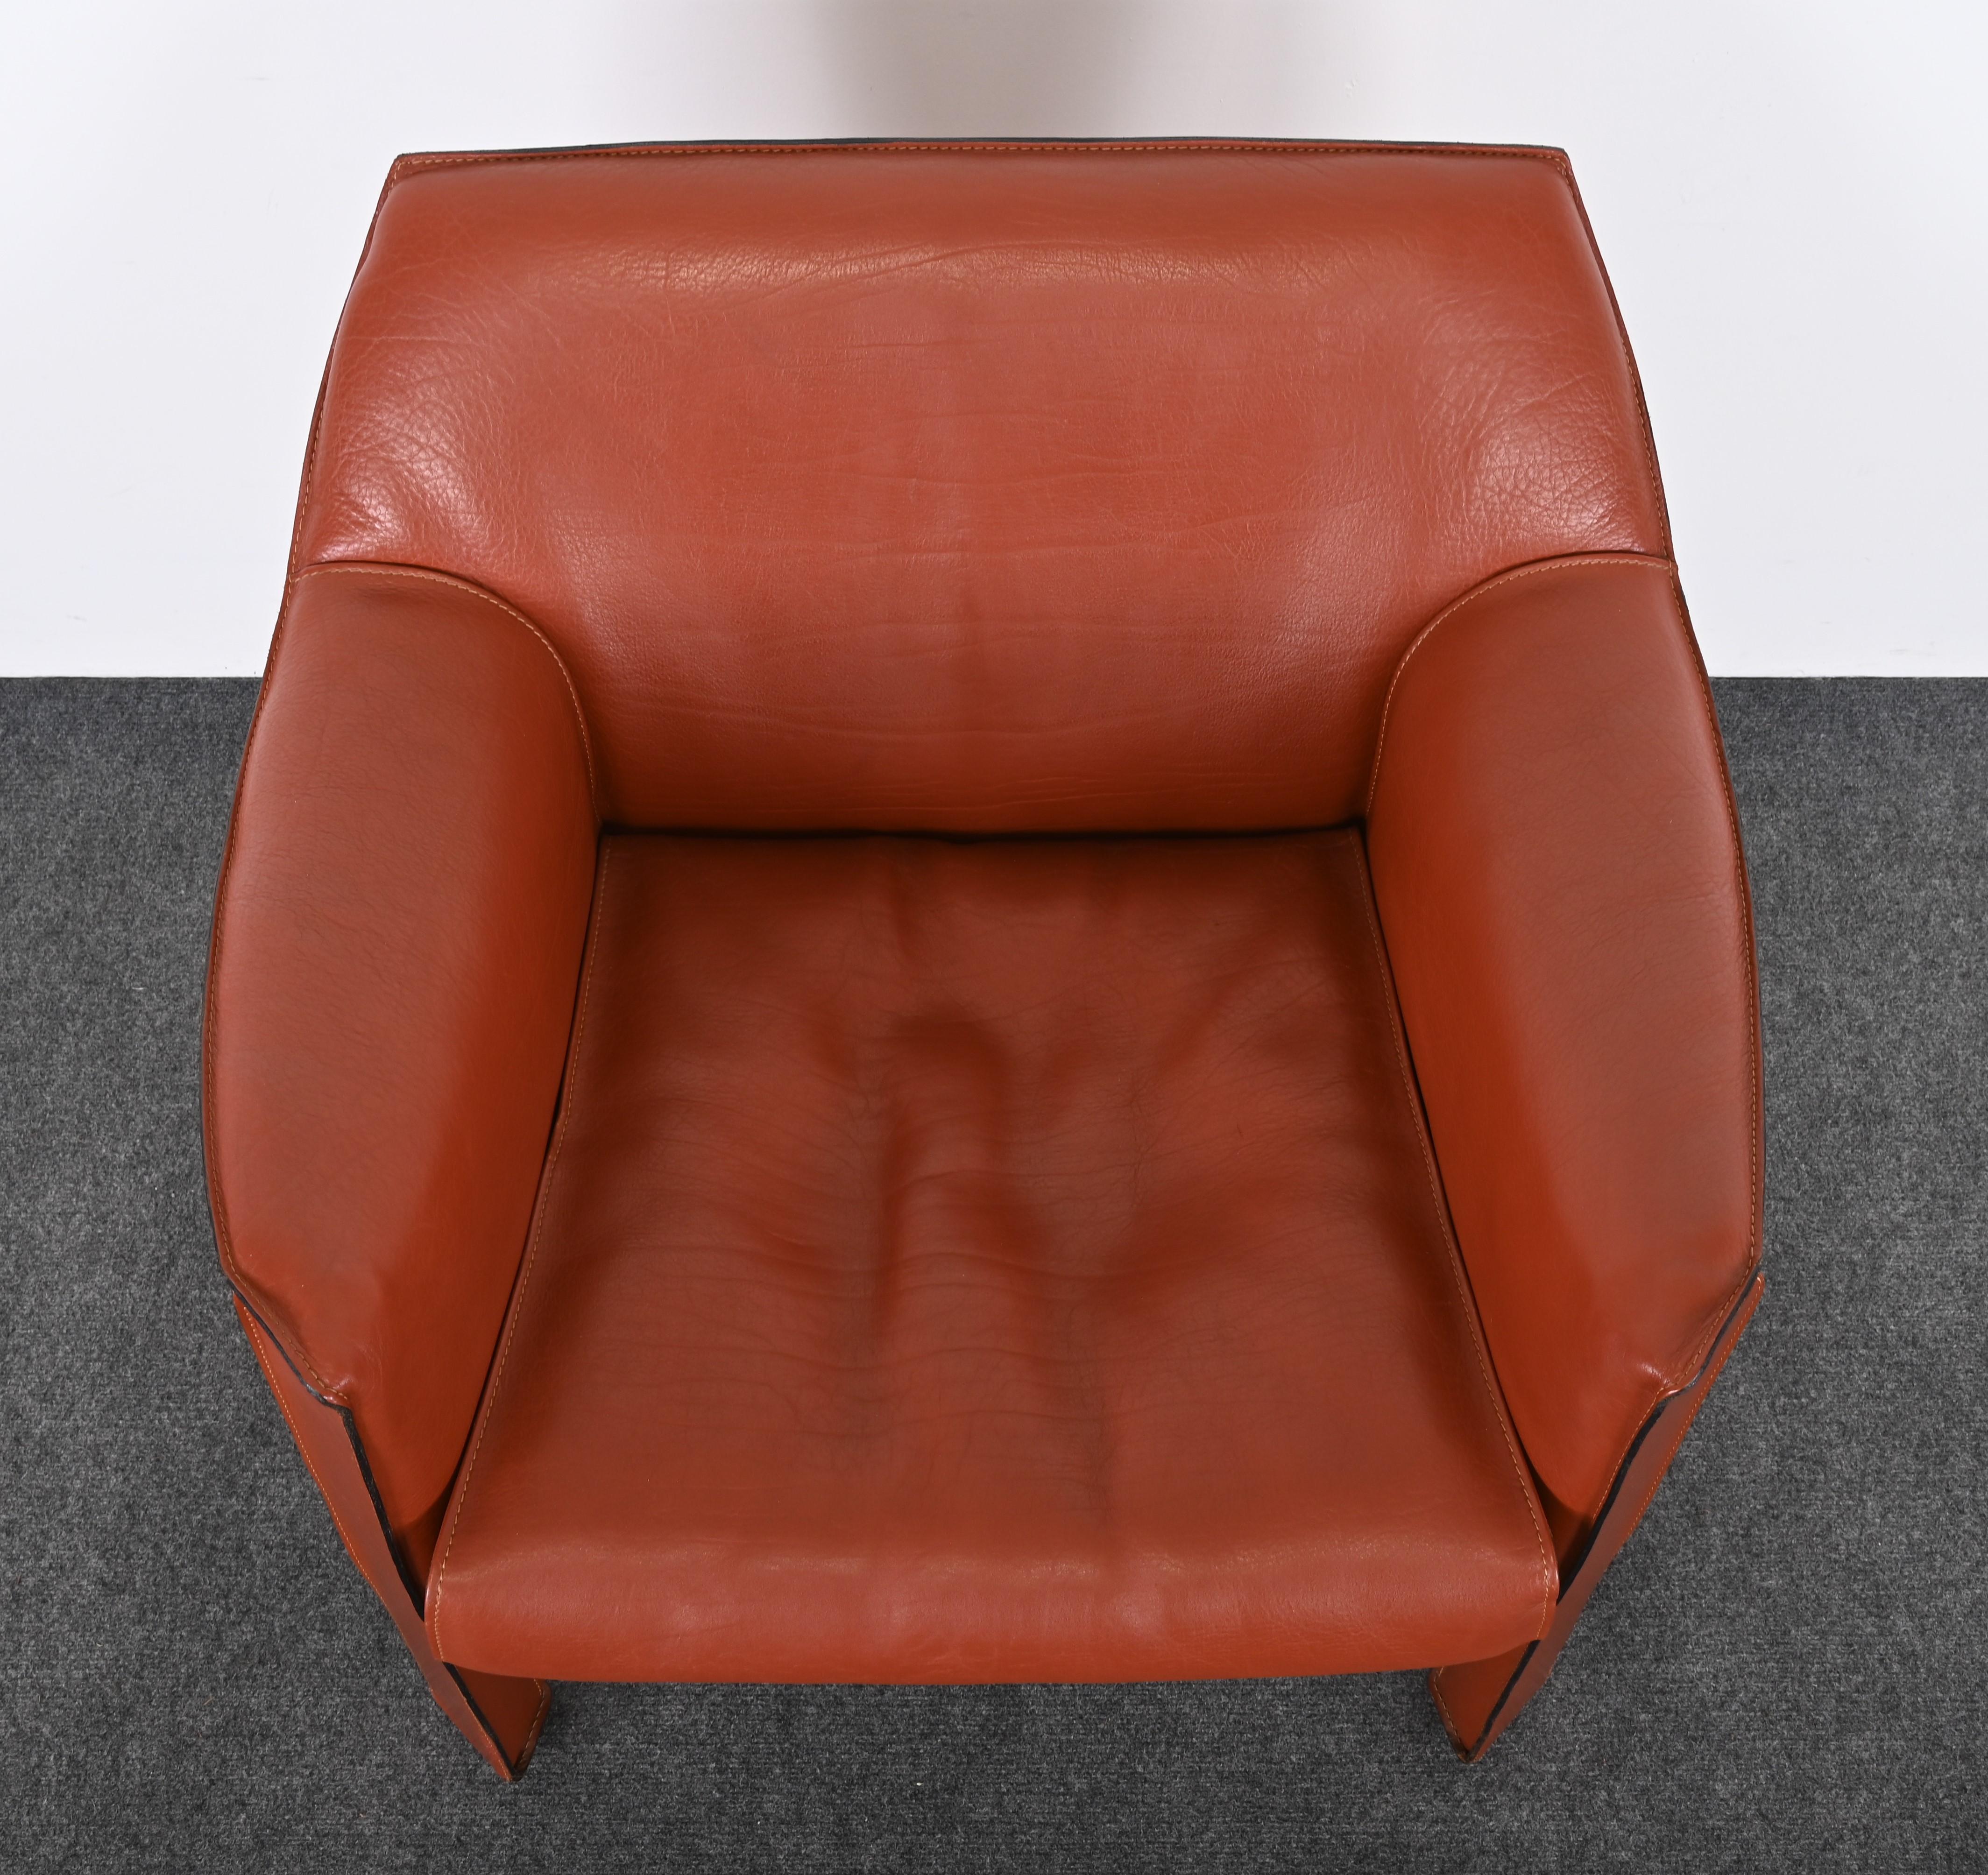 Late 20th Century Cassina Cab Chair 415 Designed by Mario Bellini, No Longer in Production